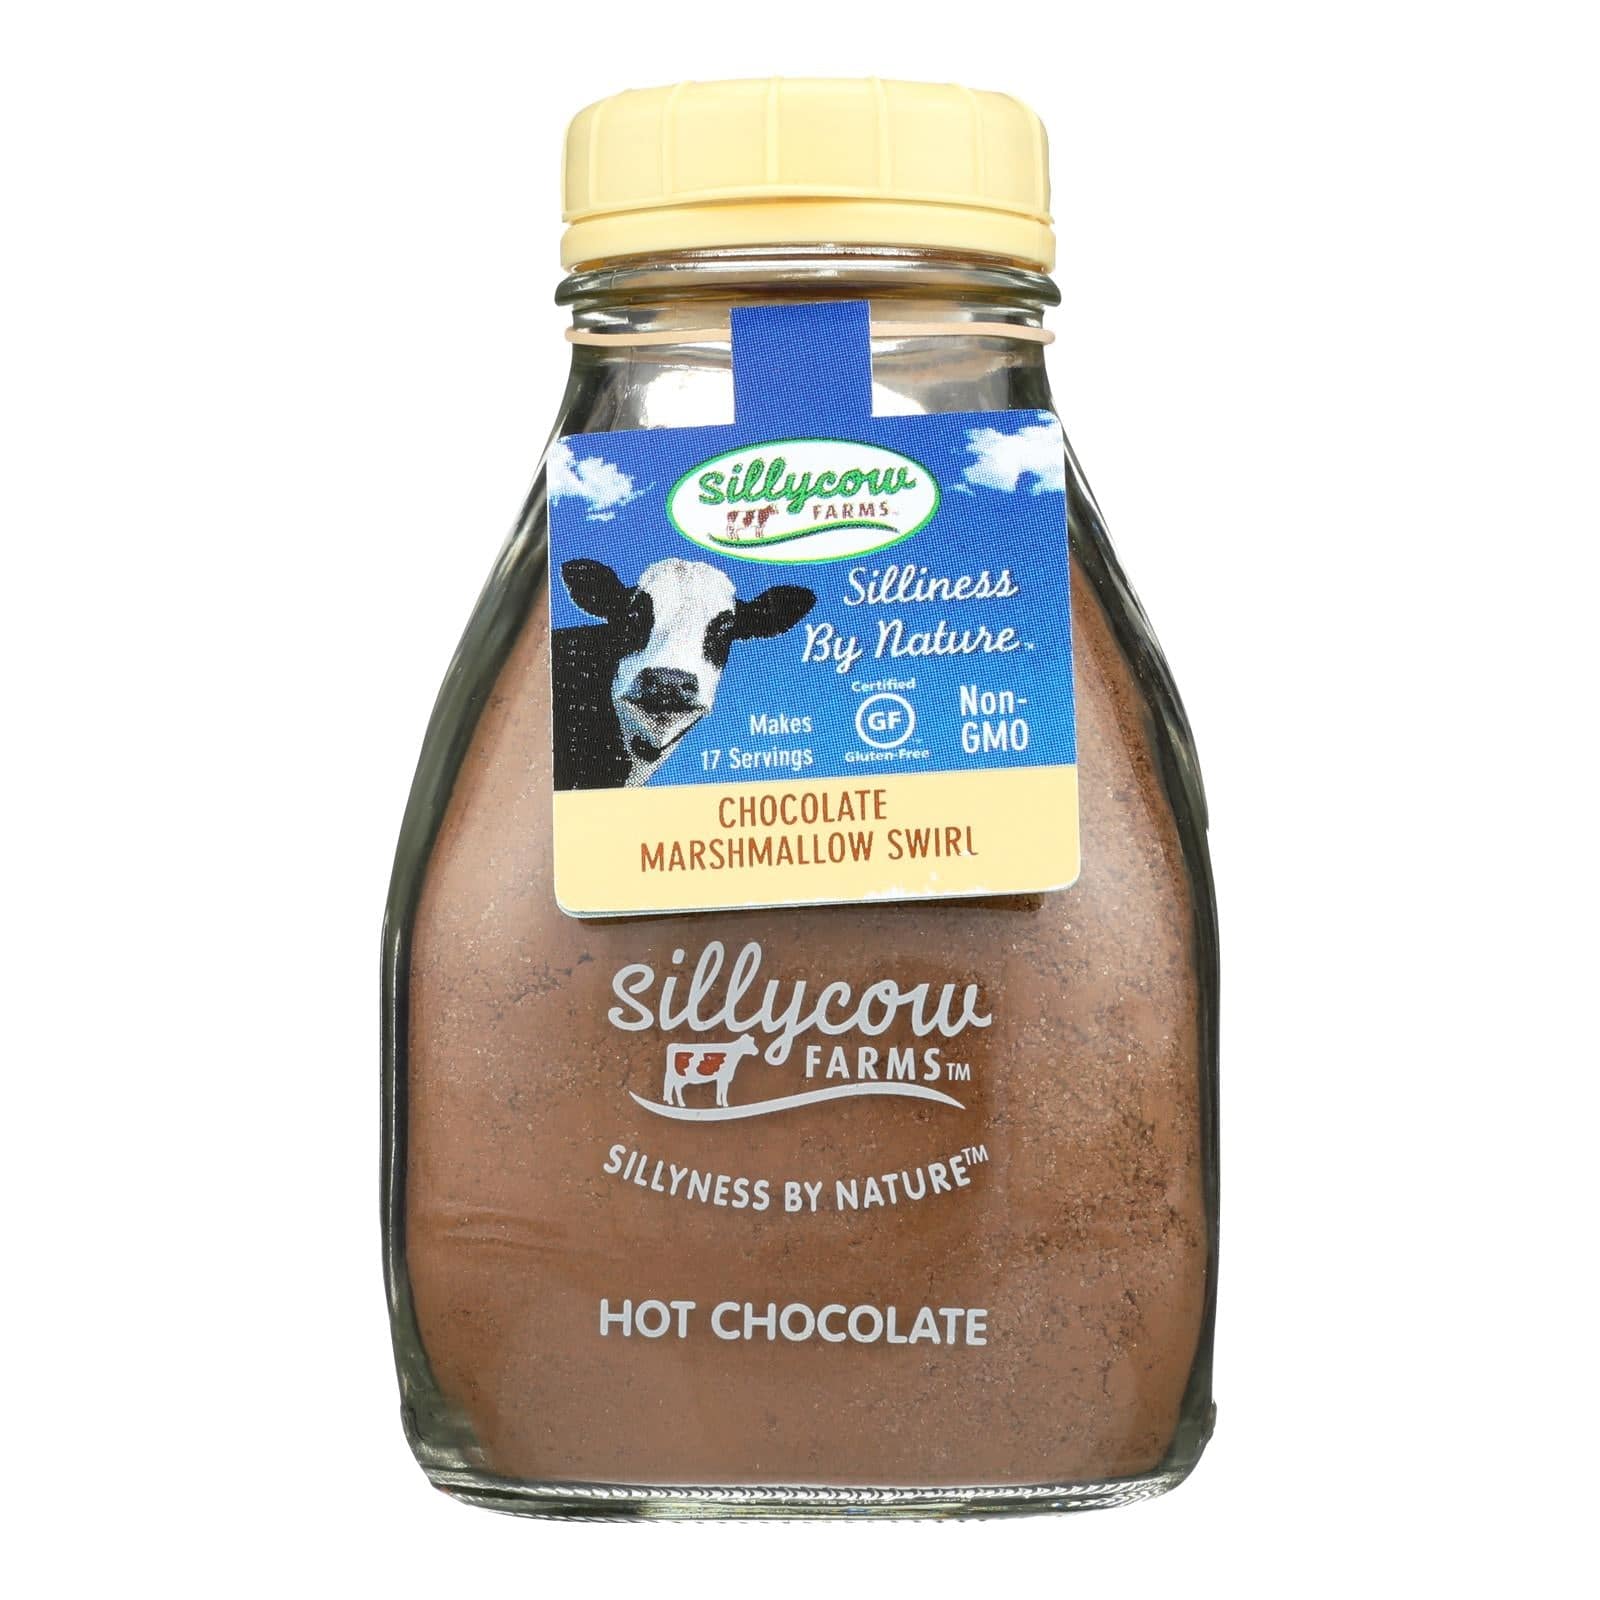 Buy Sillycow Farms Hot Chocolate - Marshmallow Swirl - Case Of 6 - 16.9 Oz.  at OnlyNaturals.us